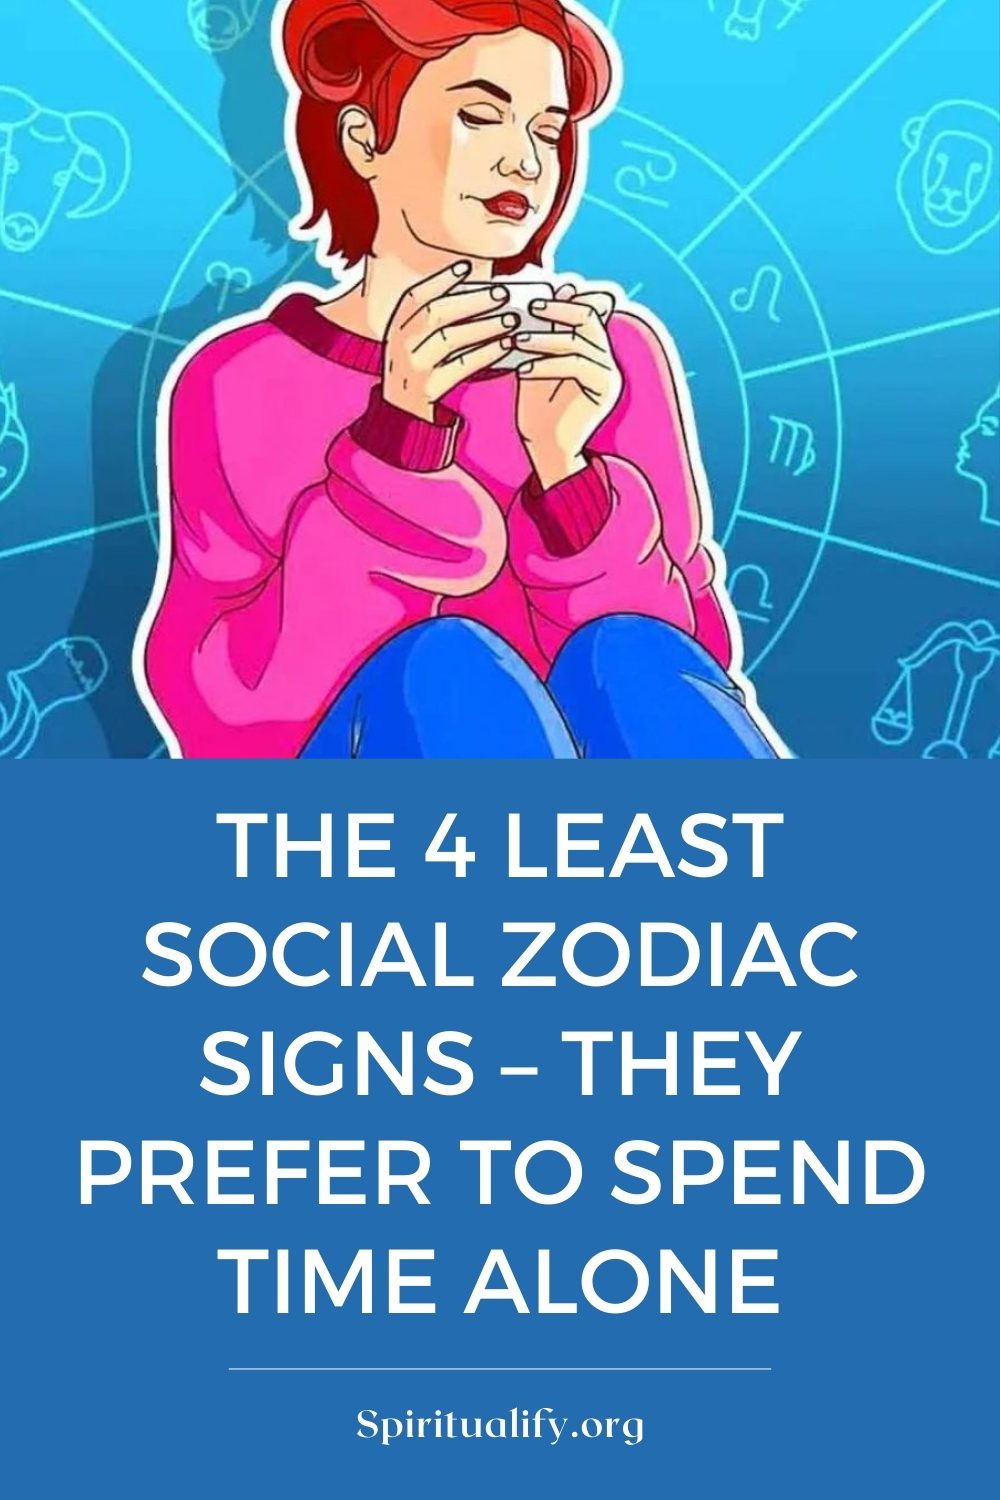 The 4 Least Social Zodiac Signs – They Prefer to Spend Time Alone Pin